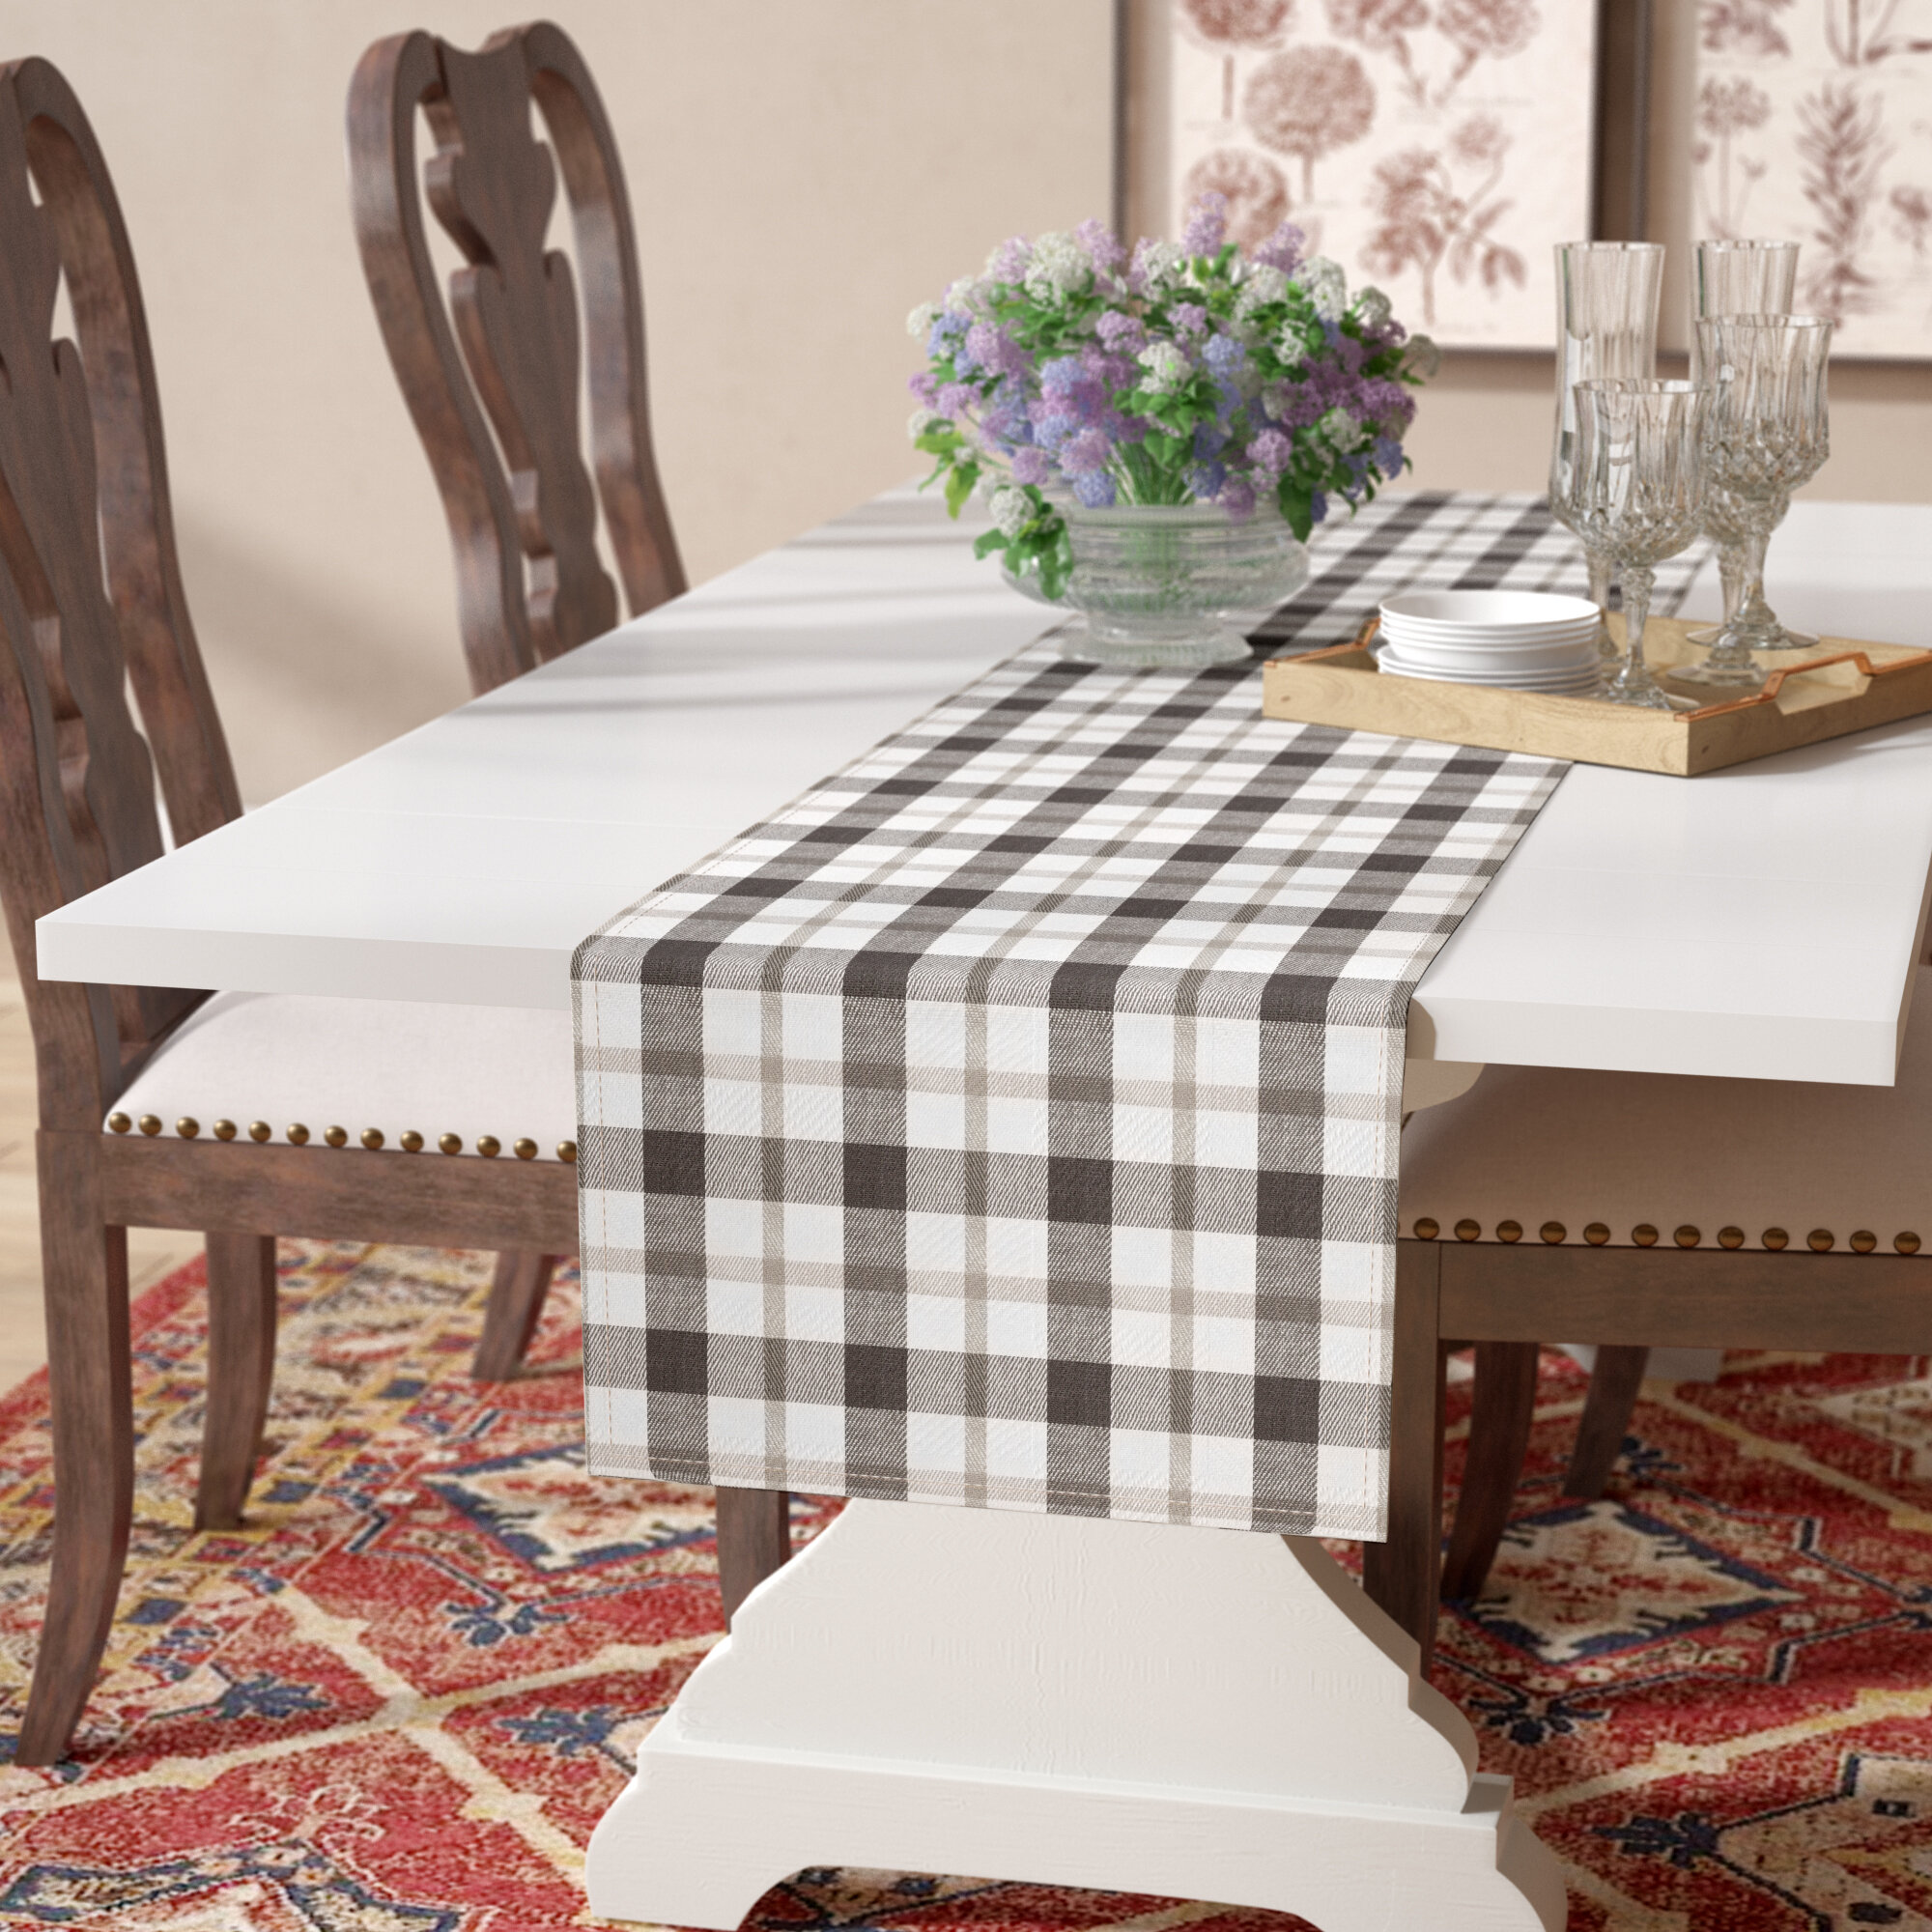 Black and White Plaid 14 x 108 Inch Poly-cotton Table Runners Buffalo Plaid Table Runners and 4 Pieces 18 x 18 Inch Washable Plaid Table Napkins Plaid Dinner Napkins for Christmas Thanksgiving Party